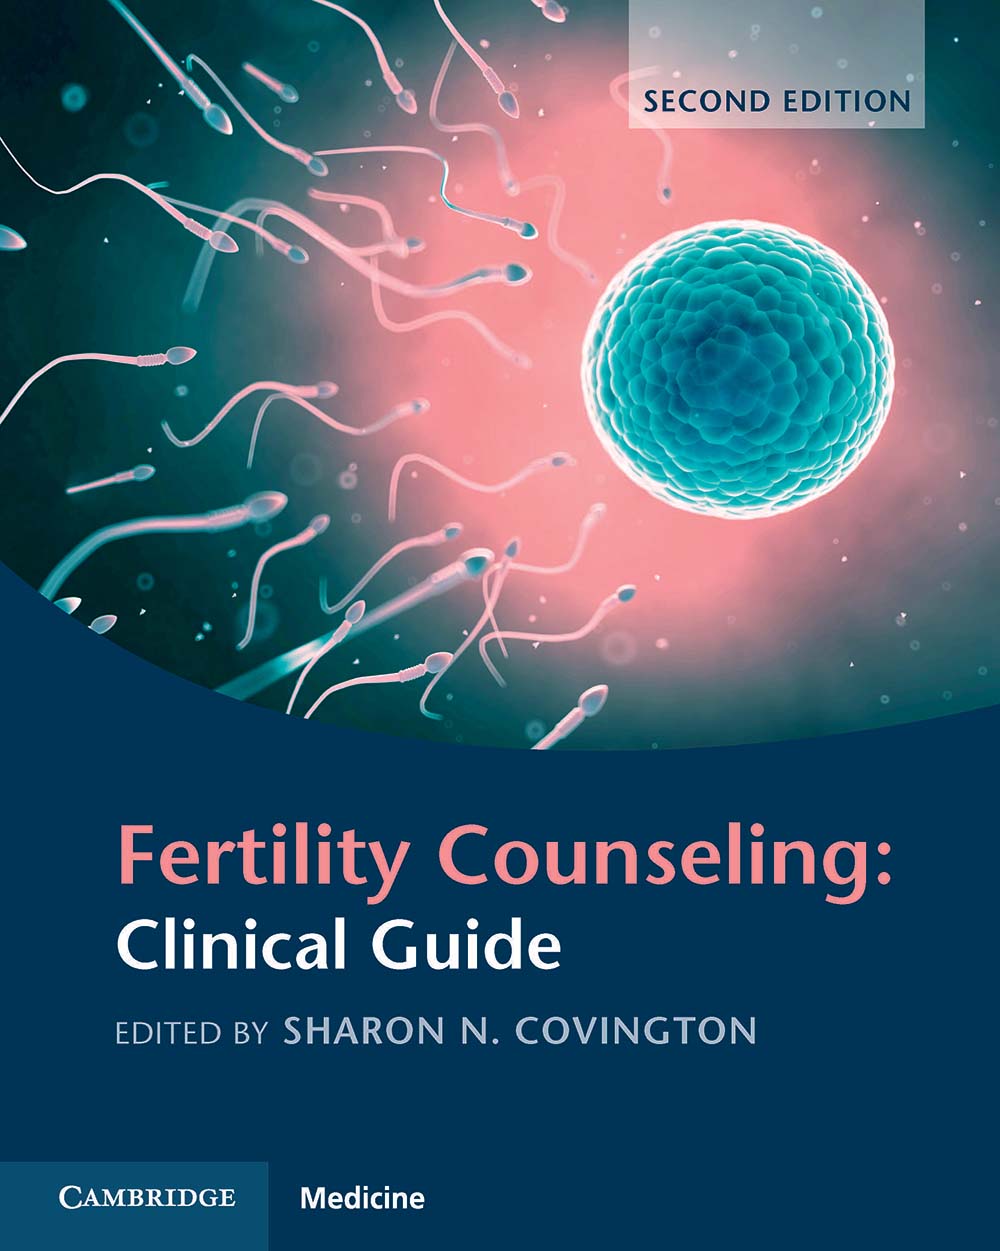 Fertility Counseling Clinical Guide